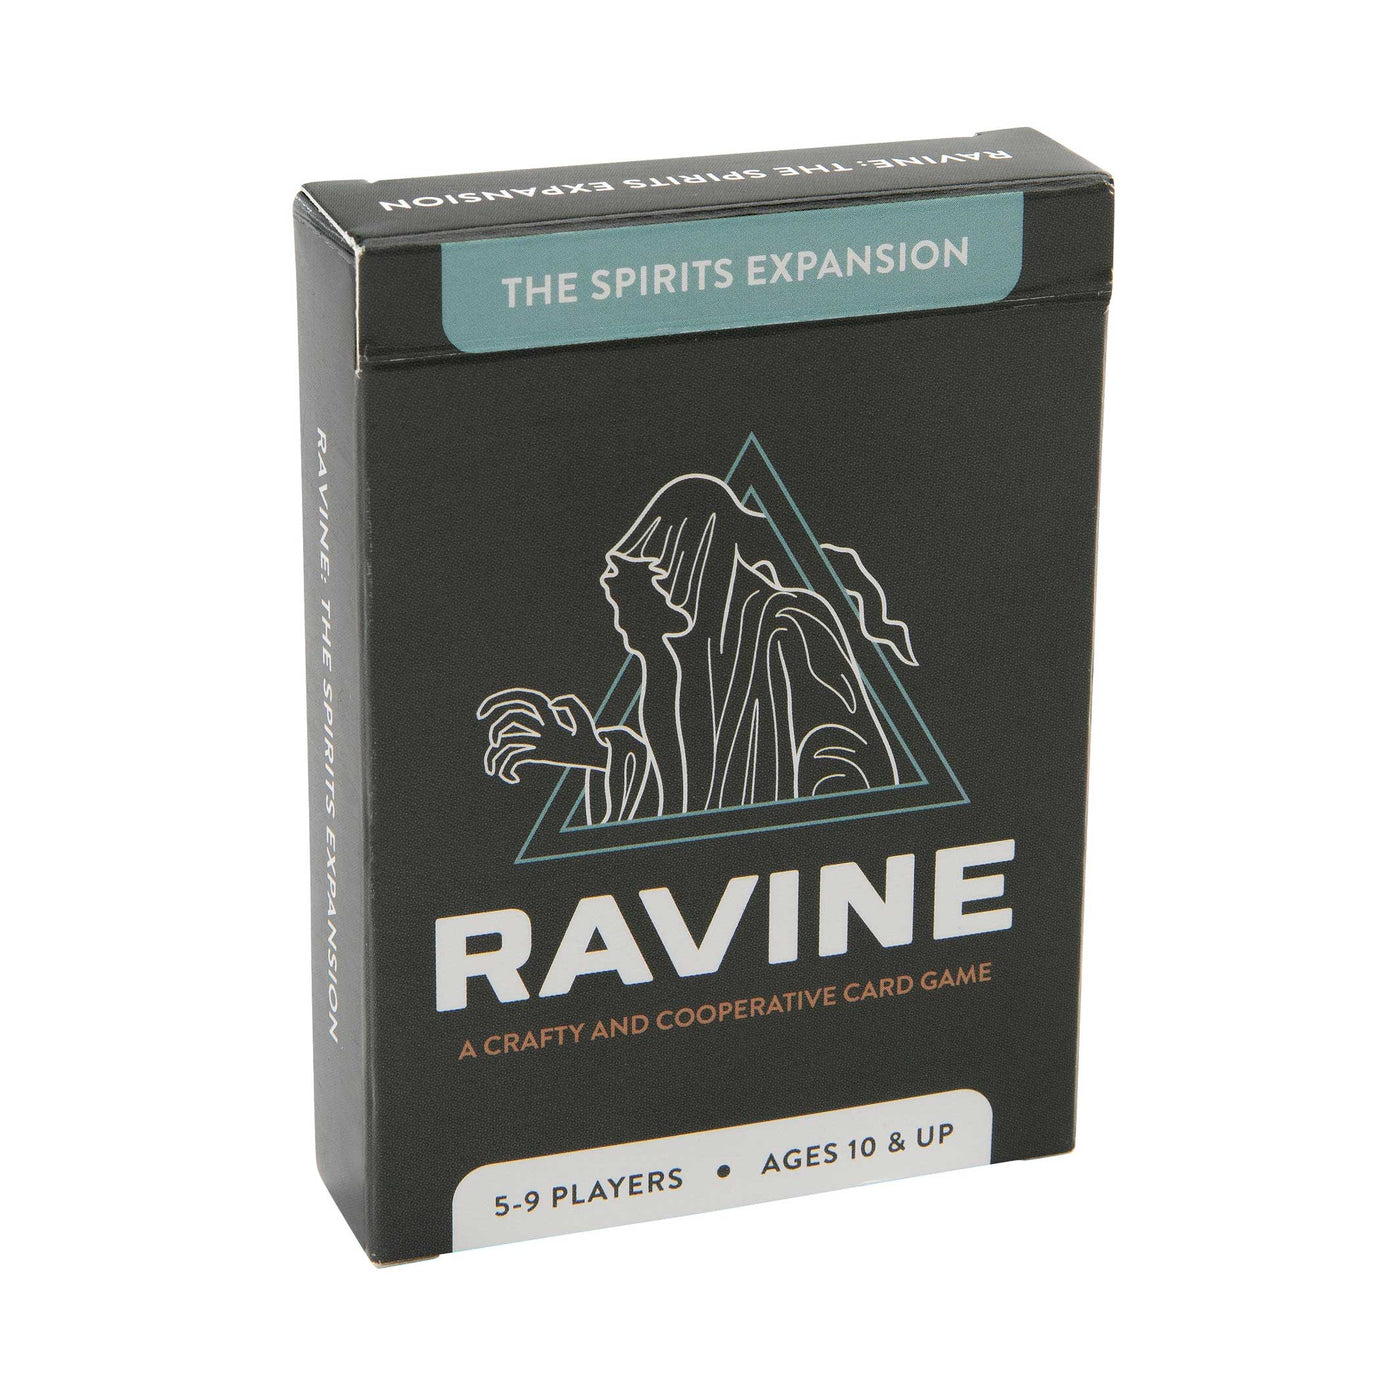 Front of packaging for Ravine's Spirits Expansion